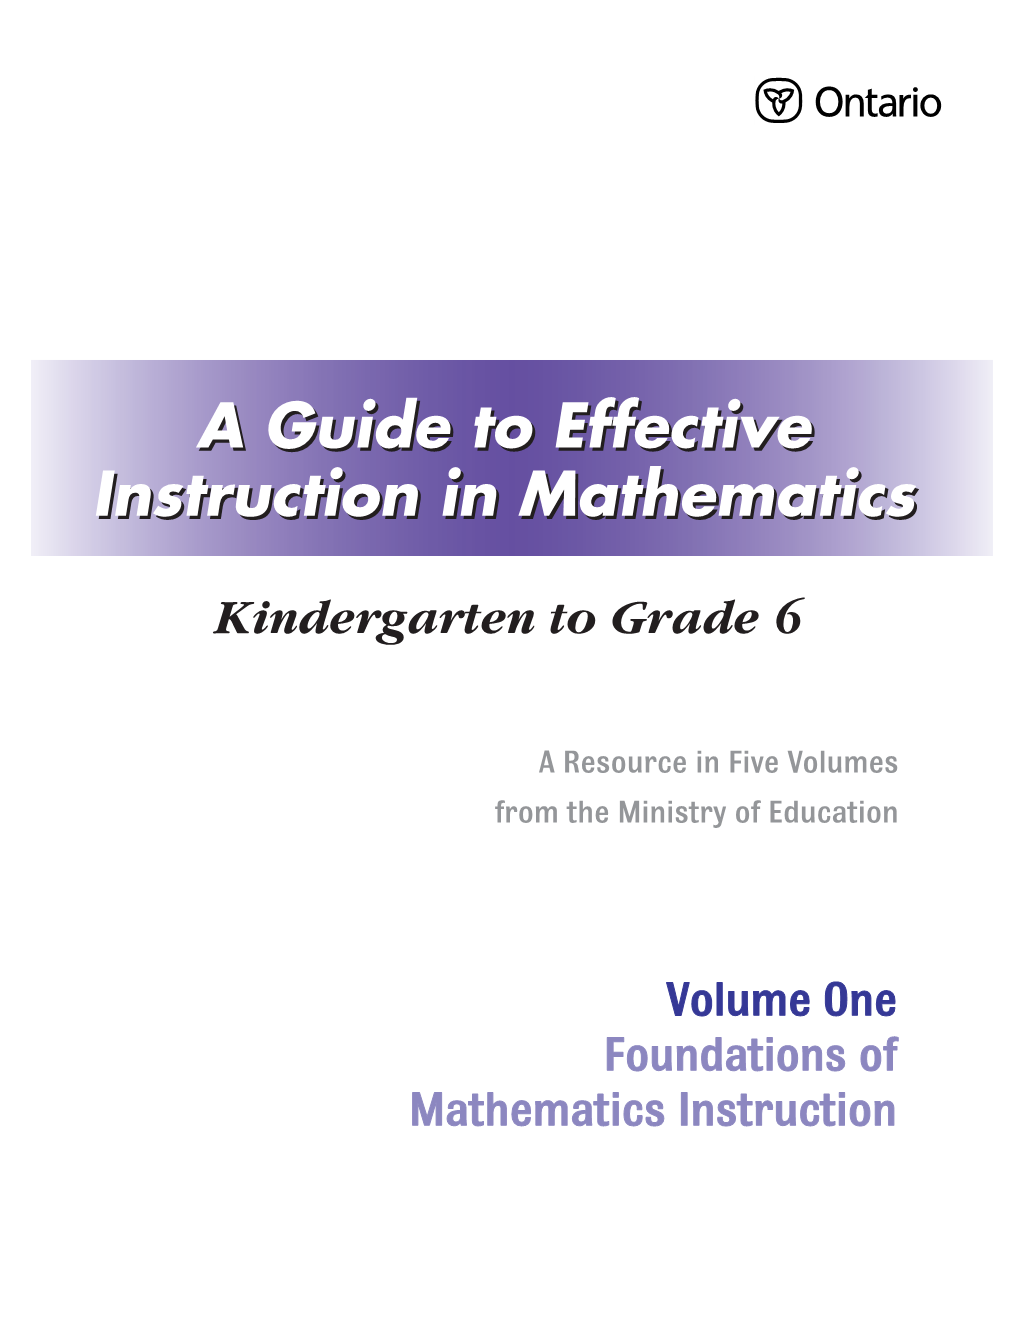 A Guide to Effective Instruction in Mathematics, Kindergarten to Grade 6 – Volume One Preface